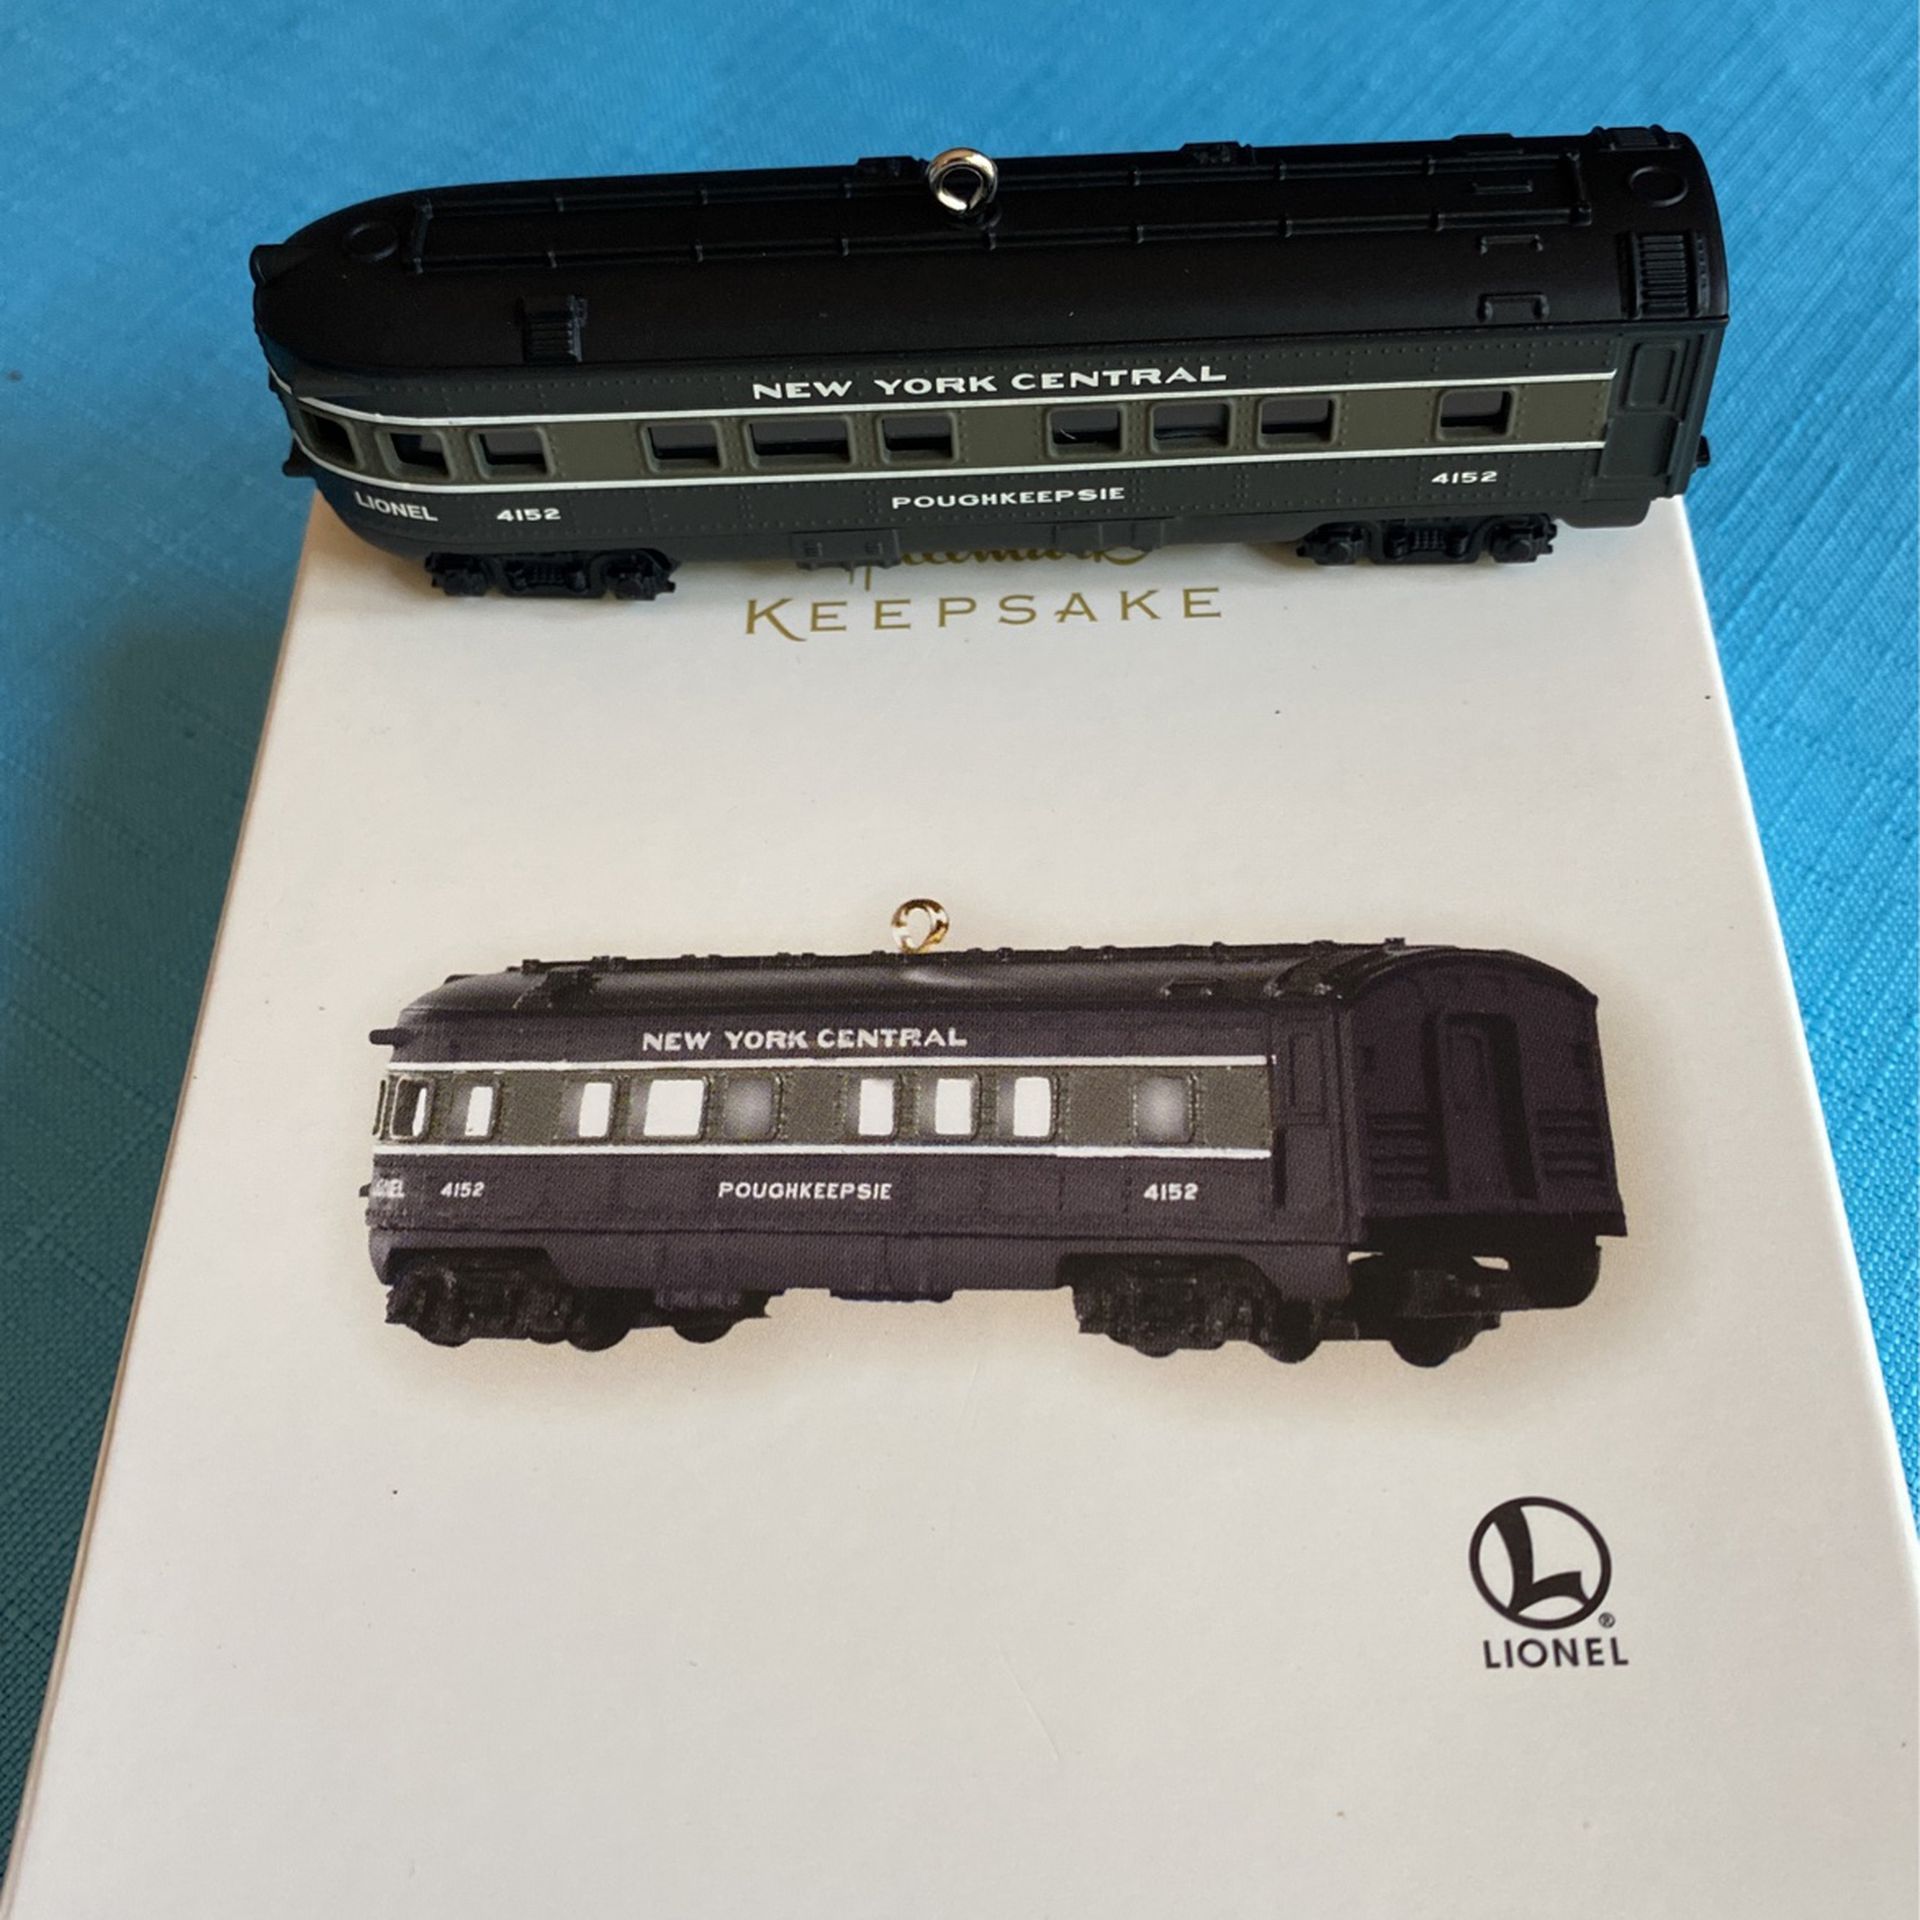 Hallmark keepsake vintage collectible Lionelville New York central observation car Christmas ornament and crafted and metal dated 2008 origin original